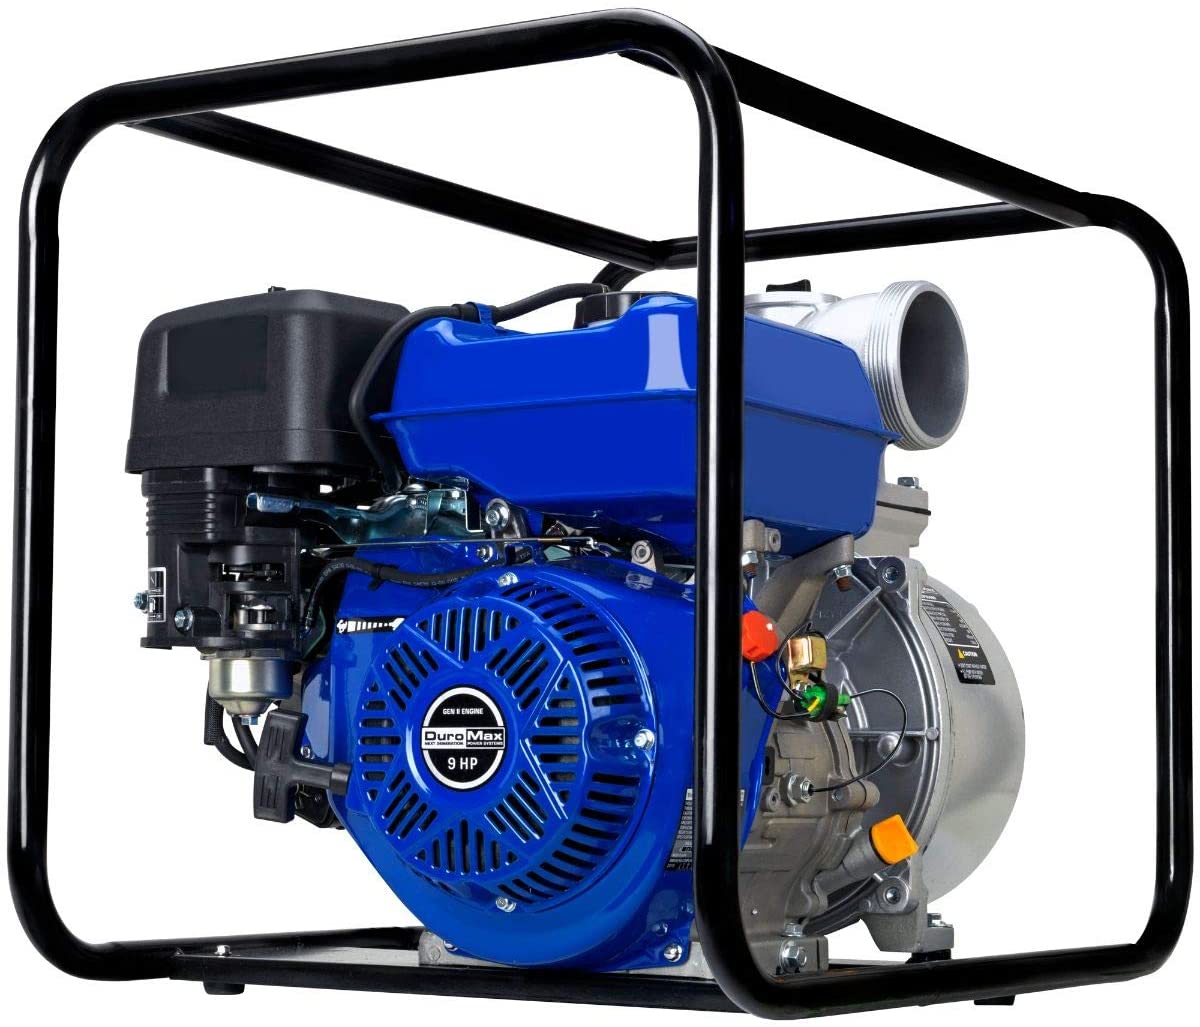 DuroMax XP904WP 270cc 427-Gpm 3600-Rpm 4-Inch Gasoline Engine Portable Water Pump $269 + free s/h at Amazon